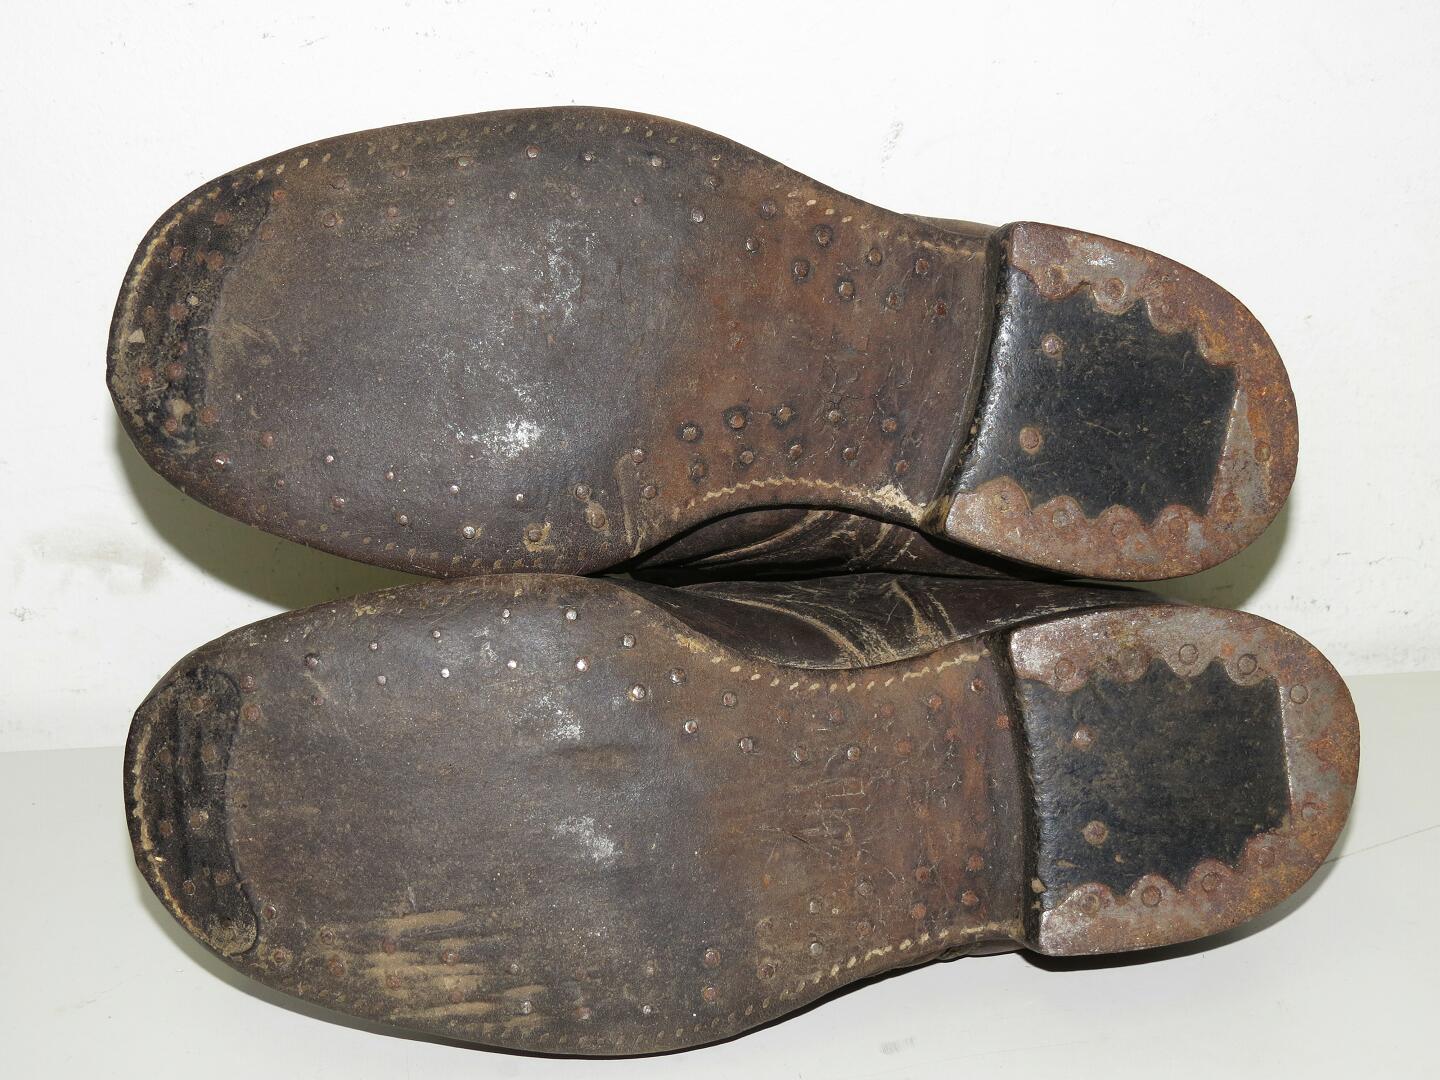 RKKA lend-lease shoes, combat used condition